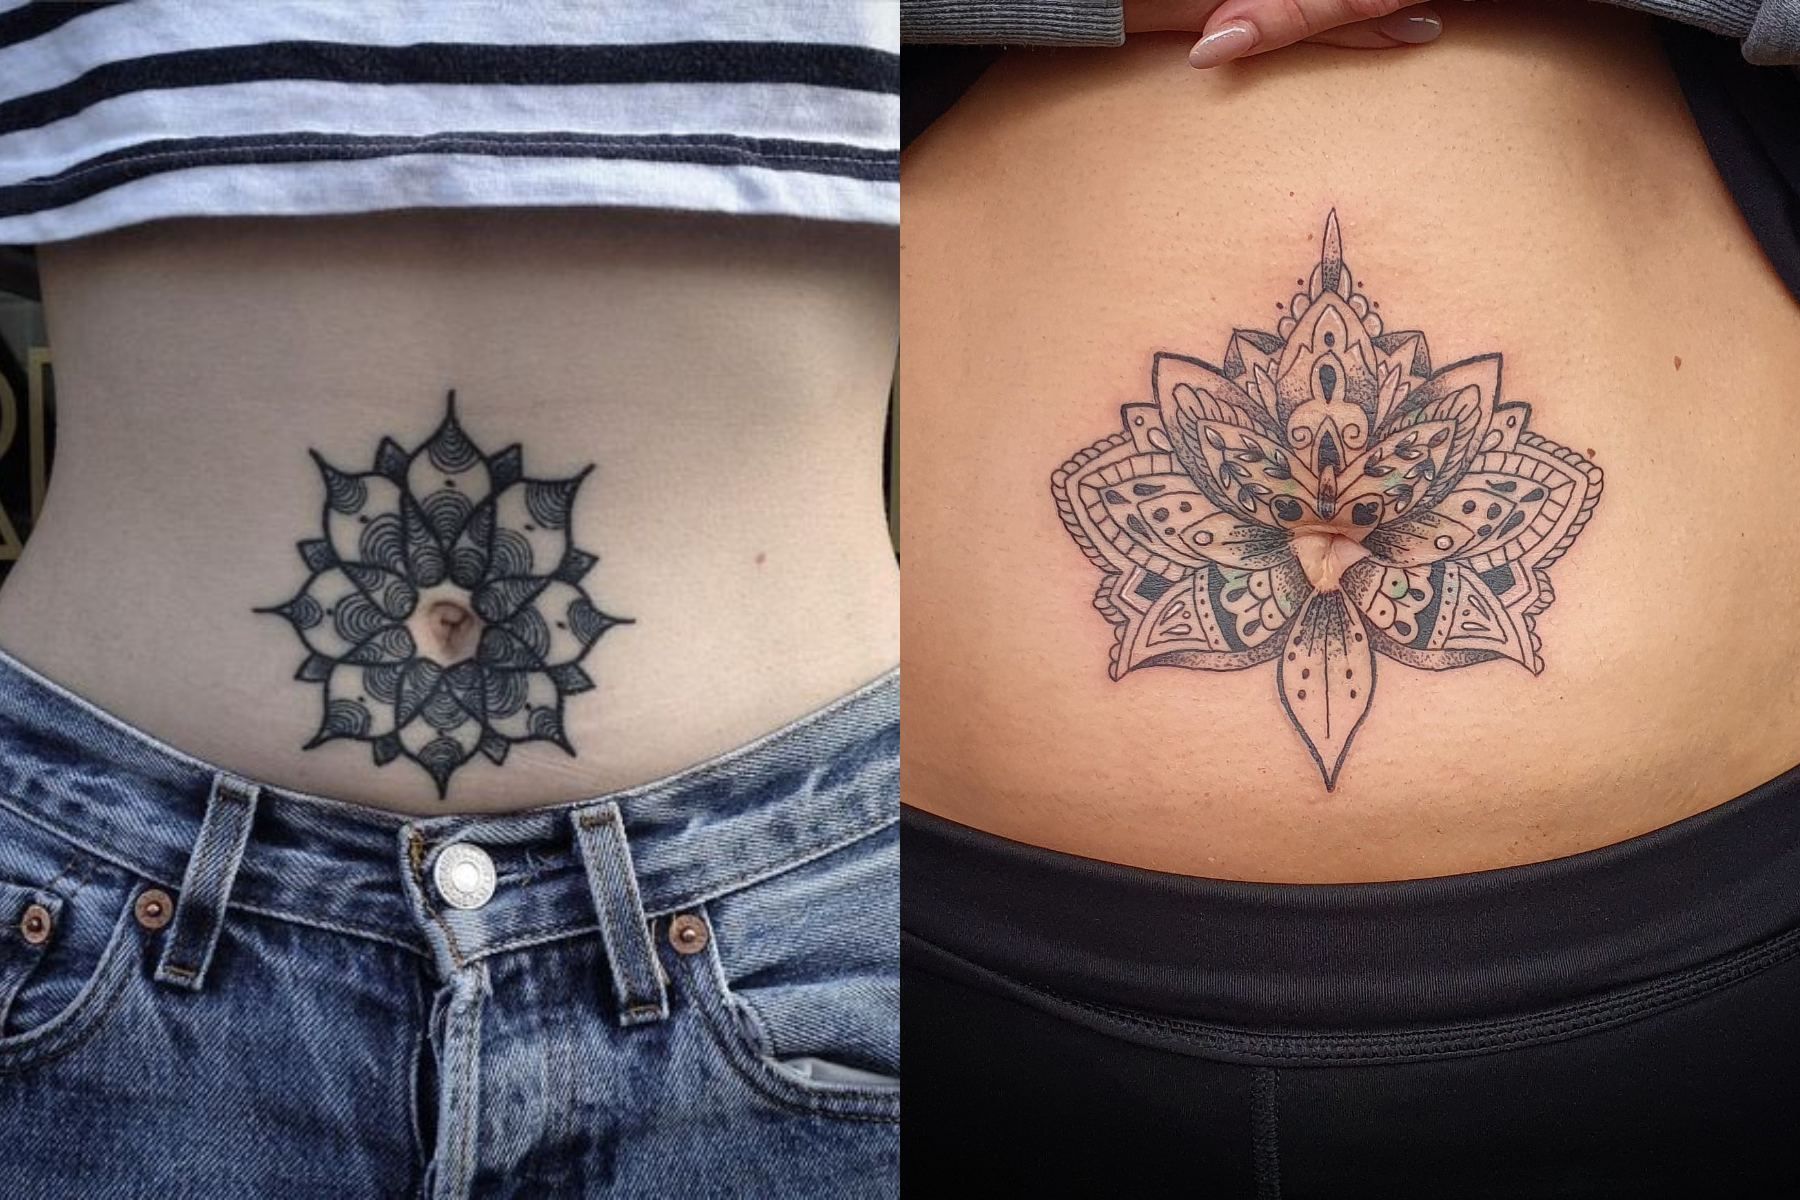 Cute stomach tattoos done by our... - Asylum tattoo studio | Facebook